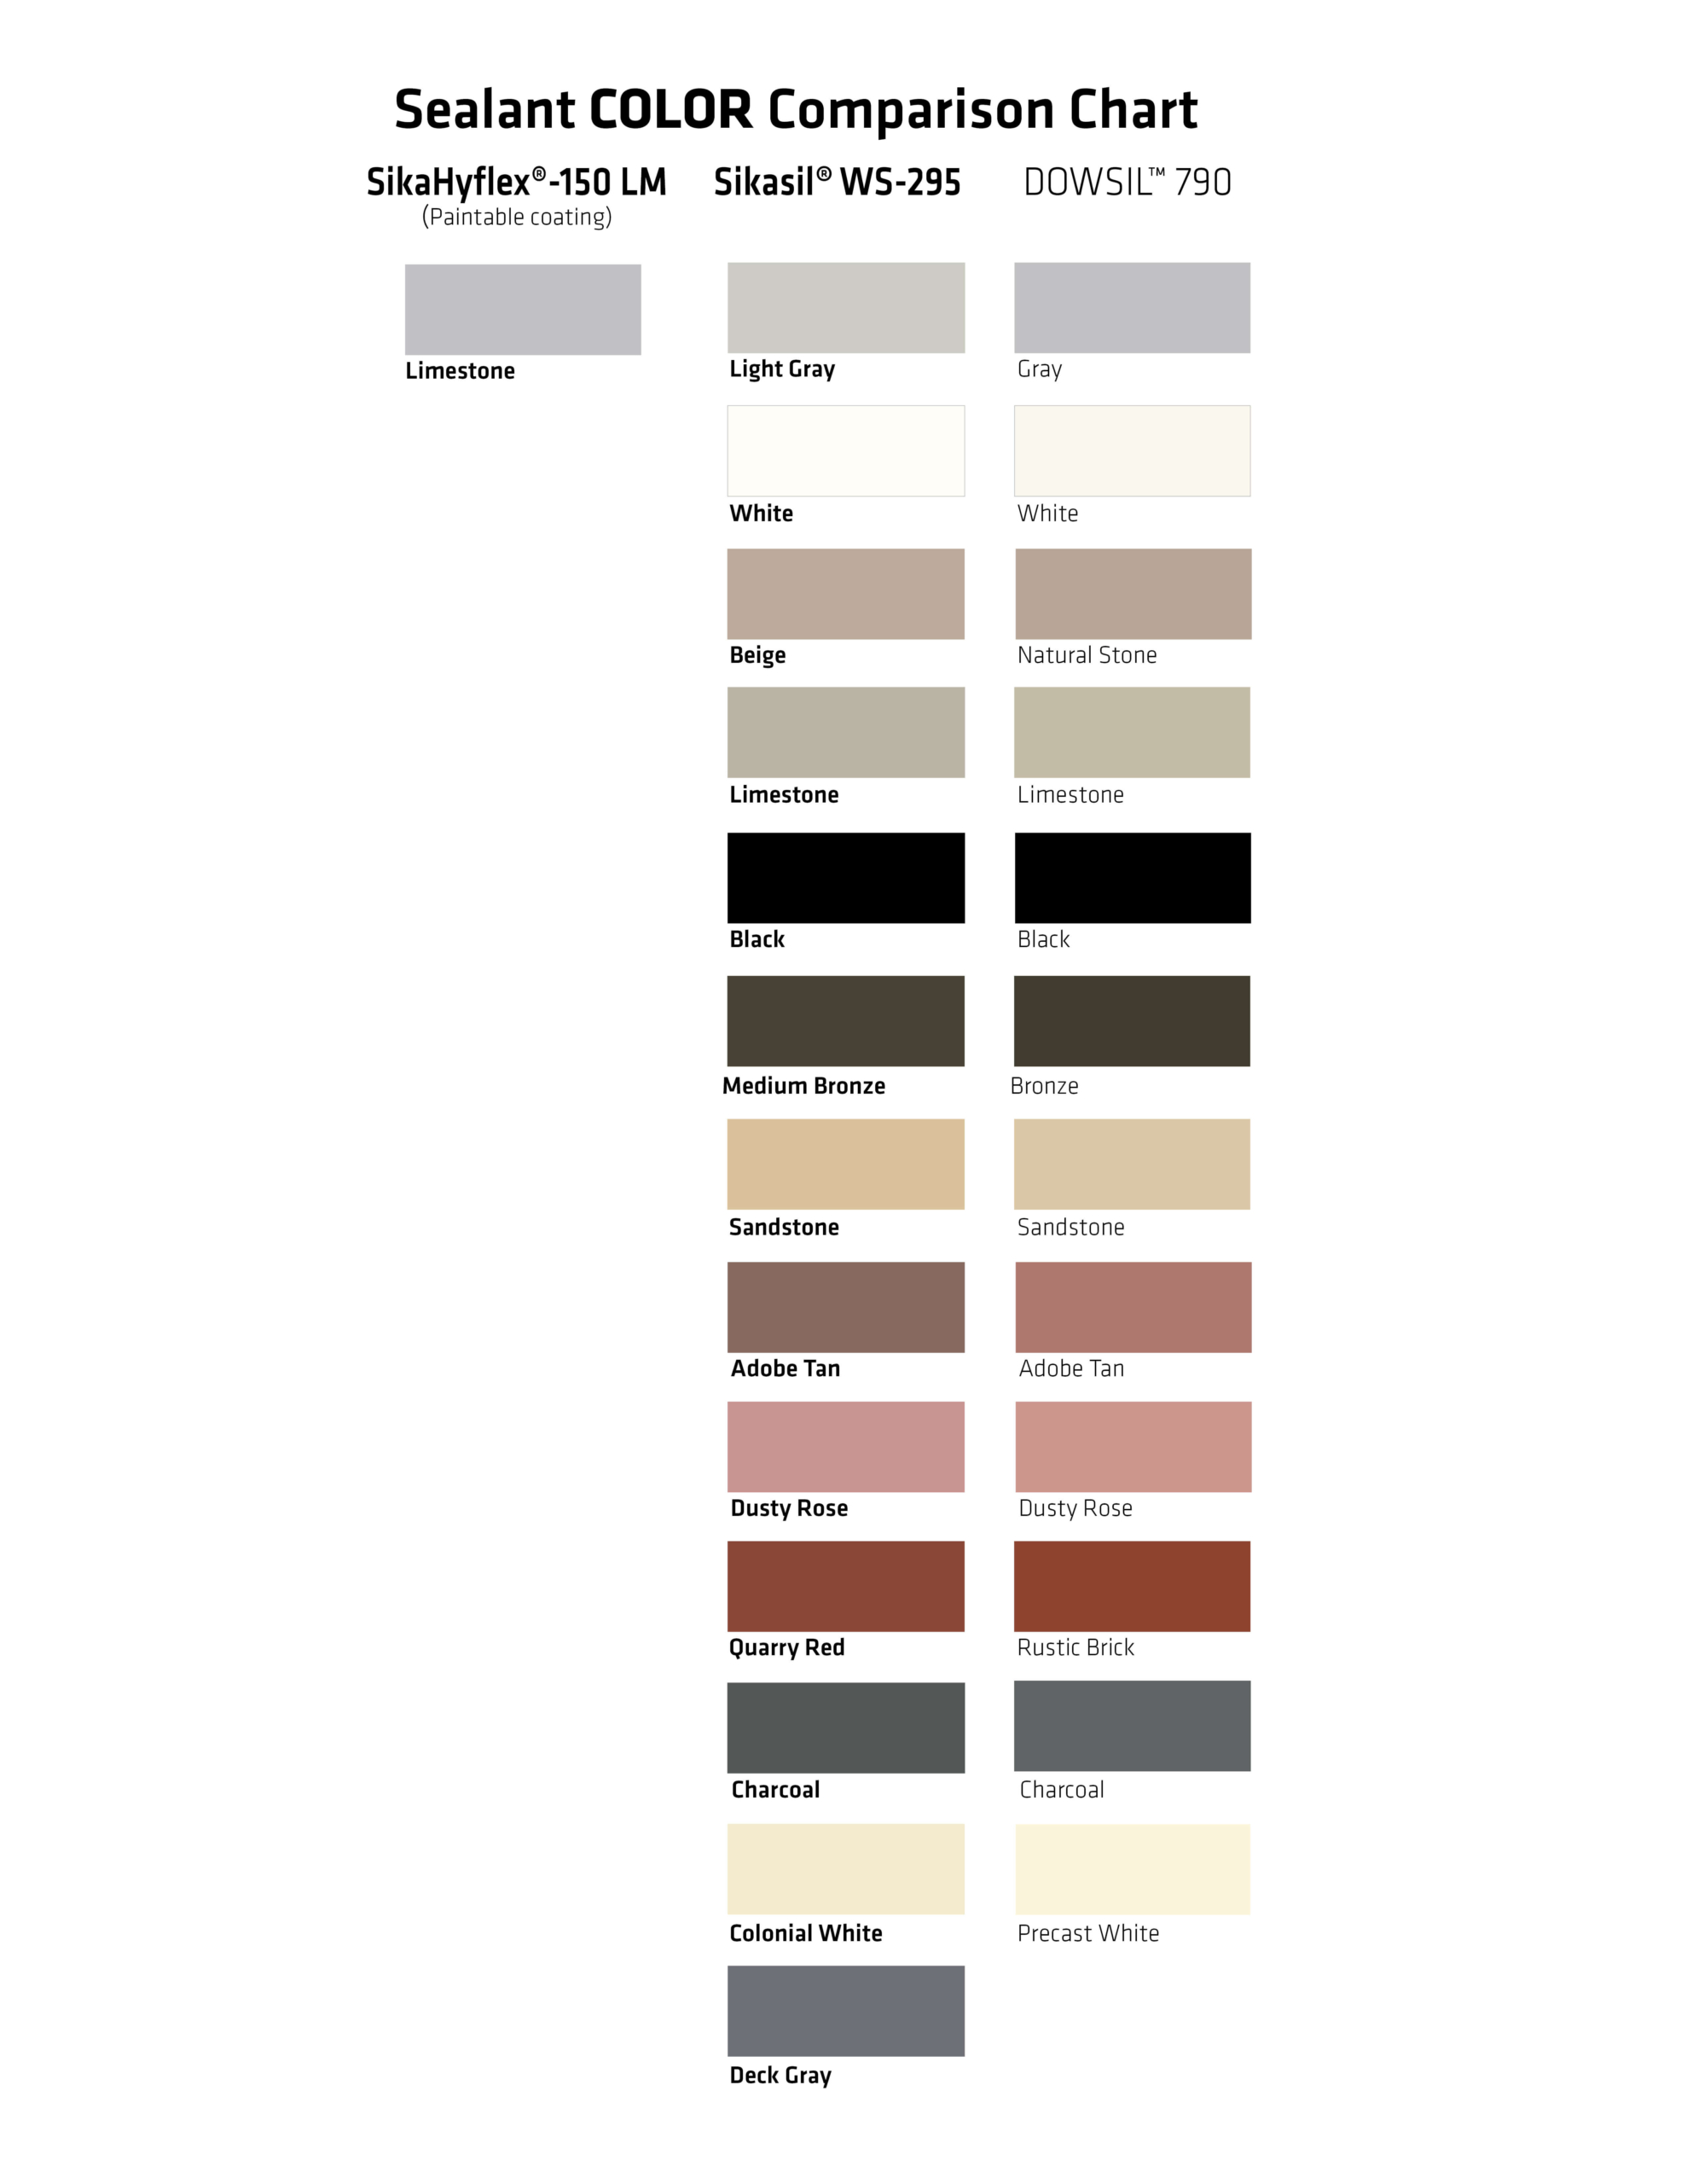 Sealant Color Comparison Chart for Building Expansion Joint Systems by Sika Emseal